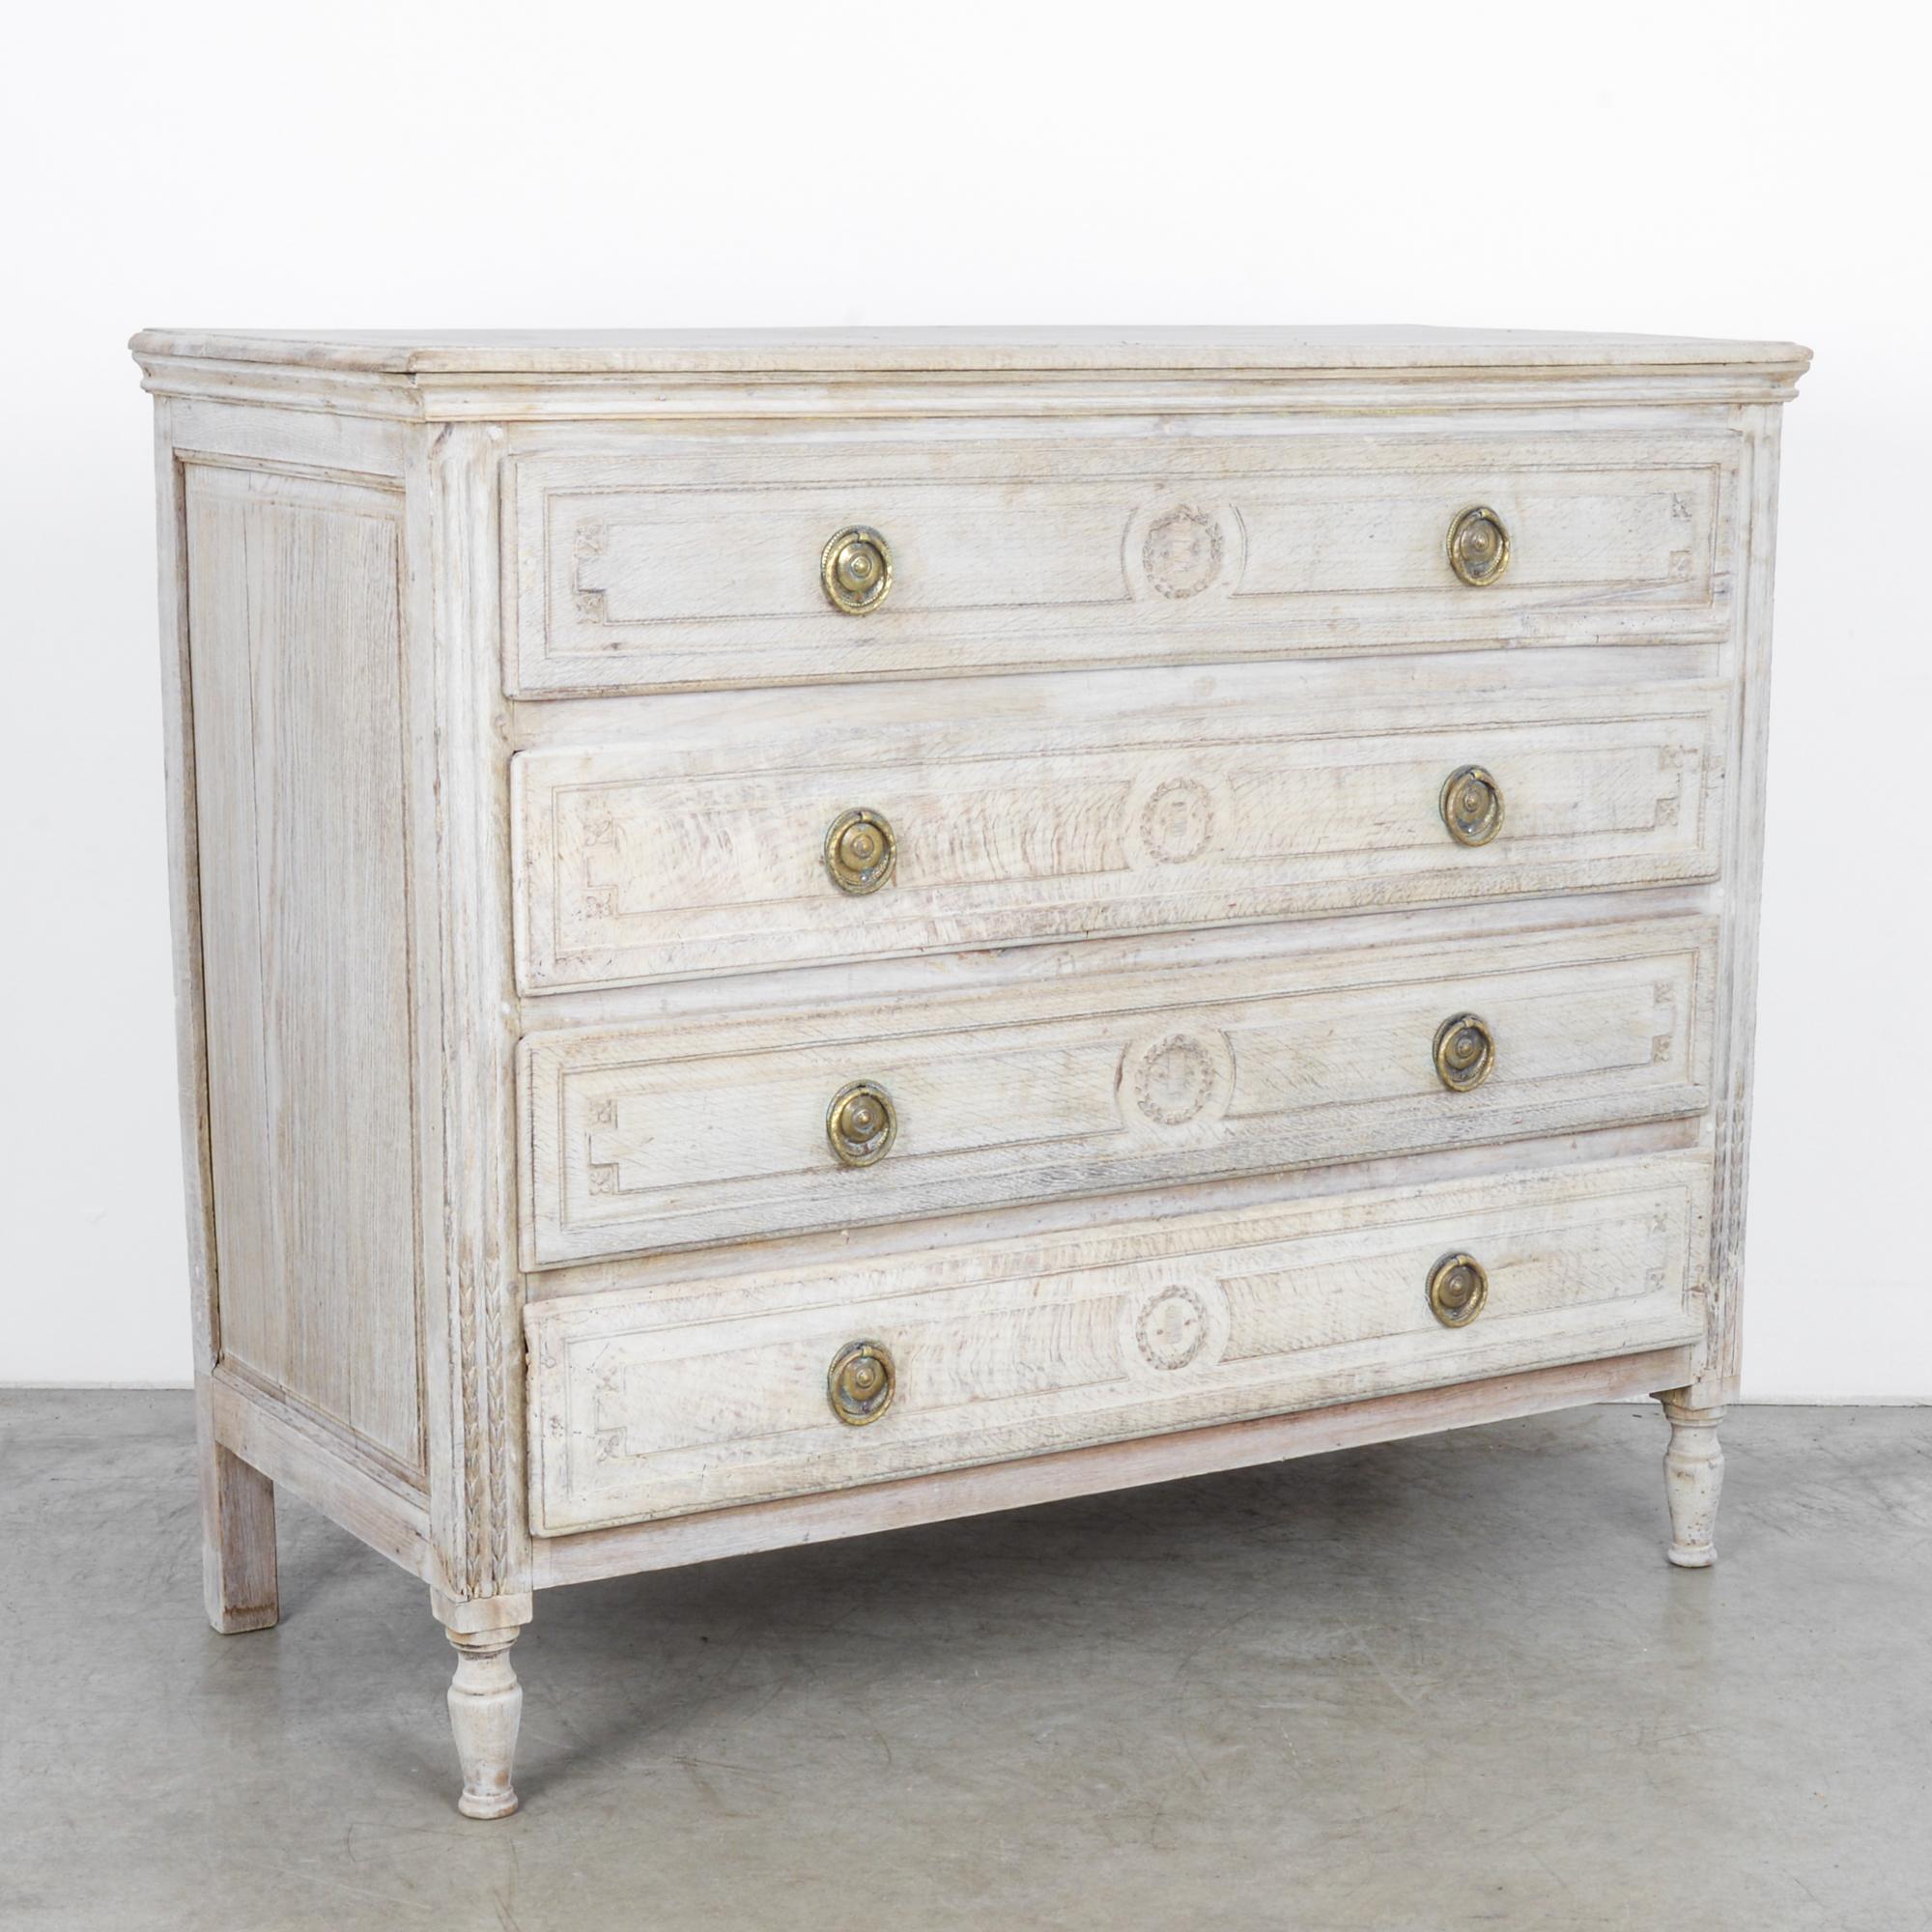 French 1820s Empire Style Bleached Oak Drawer Chest